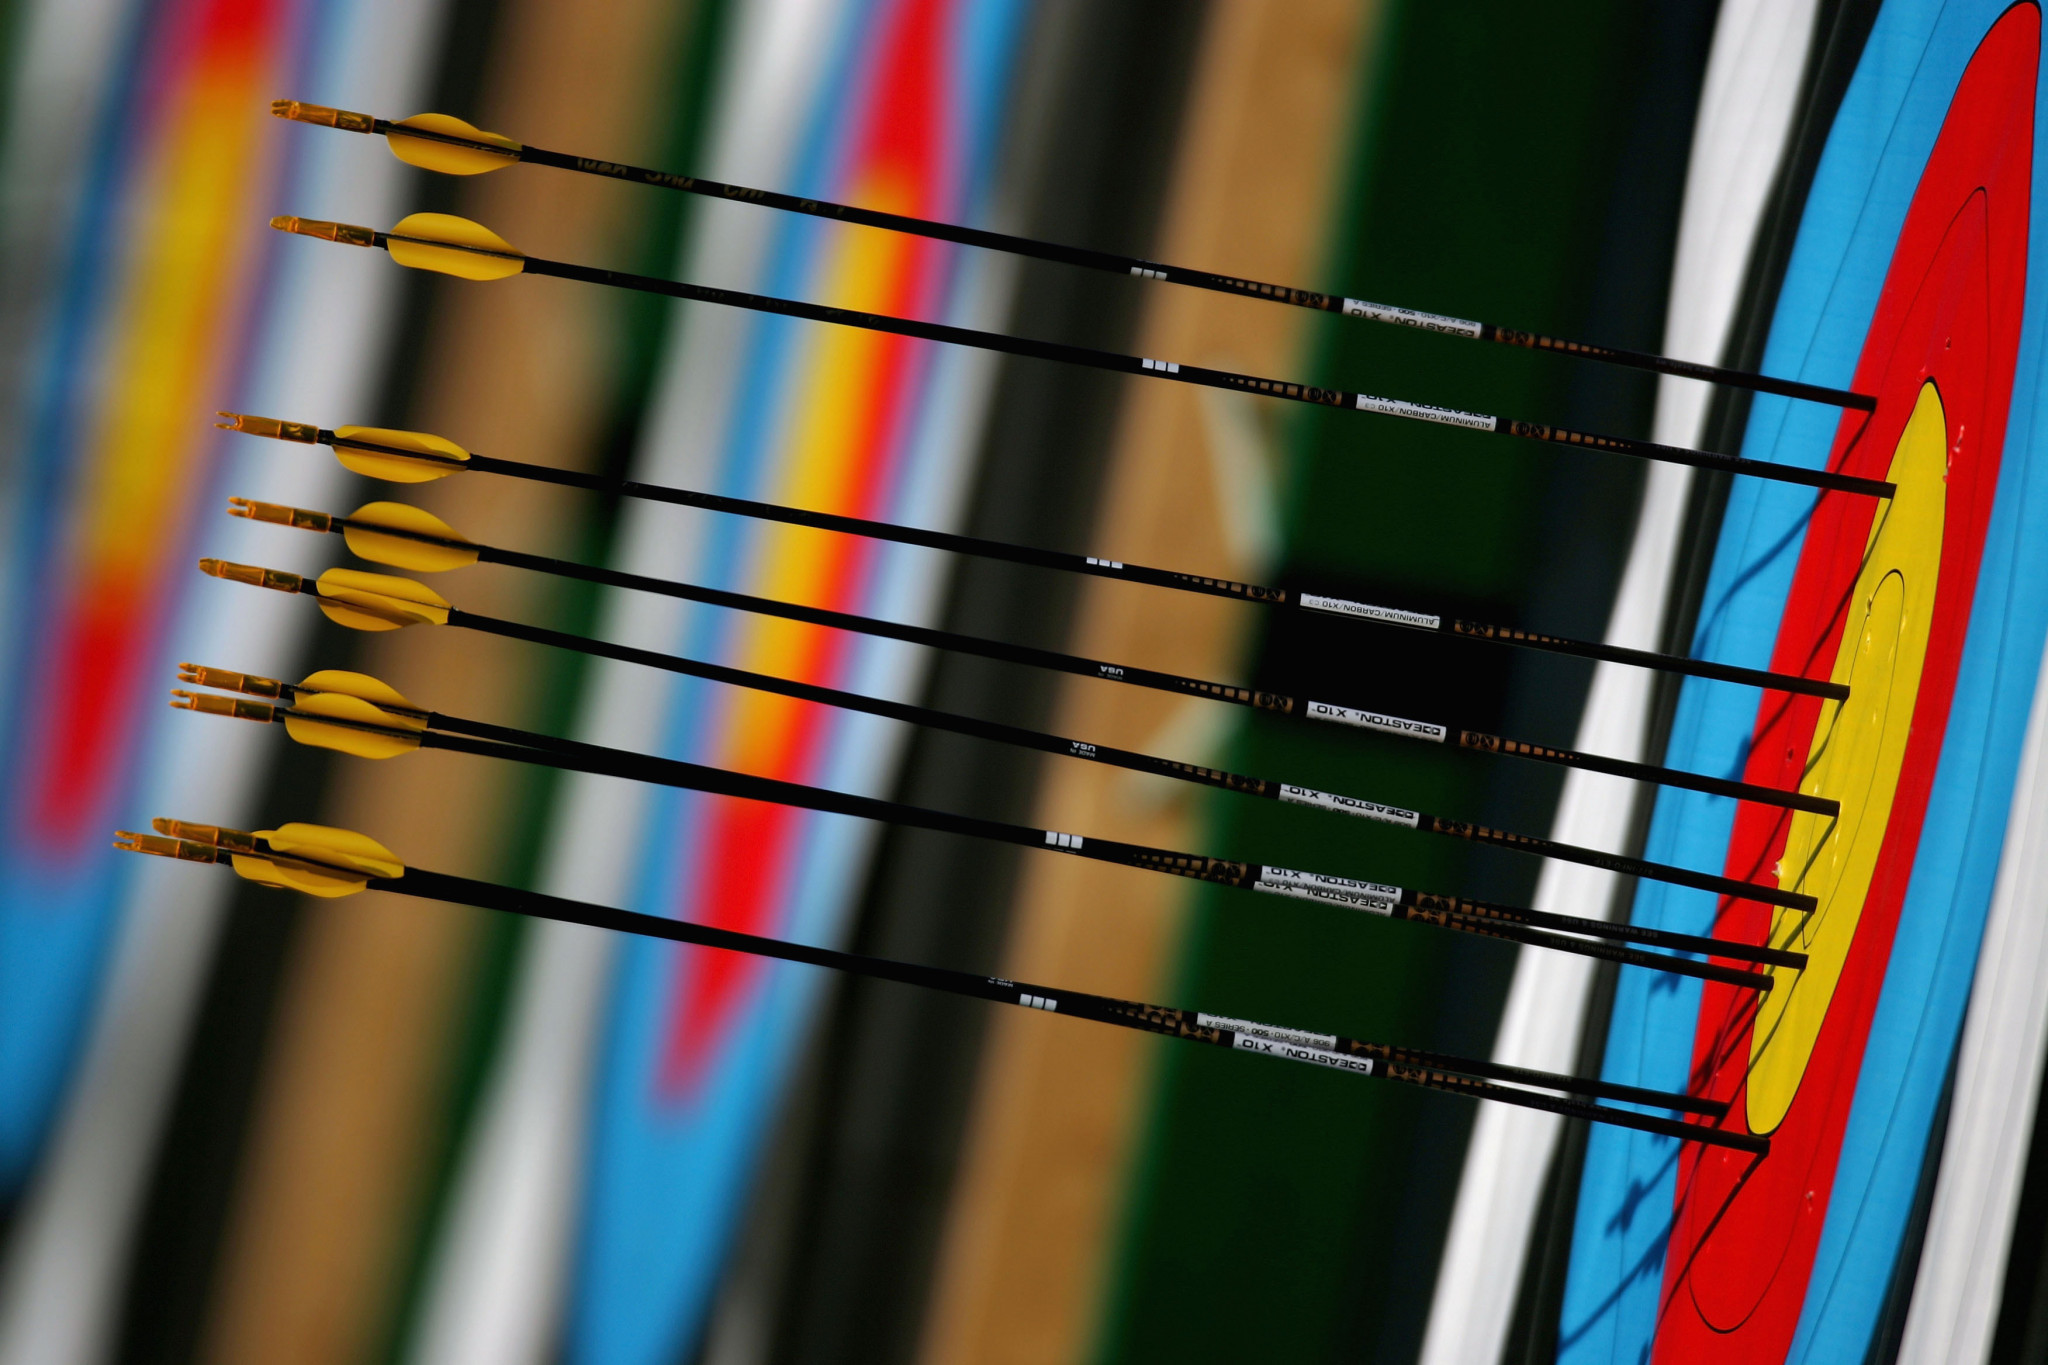 The compound finals at the World Archery Youth Championships were held today, with the recurve finals following tomorrow ©Getty Images